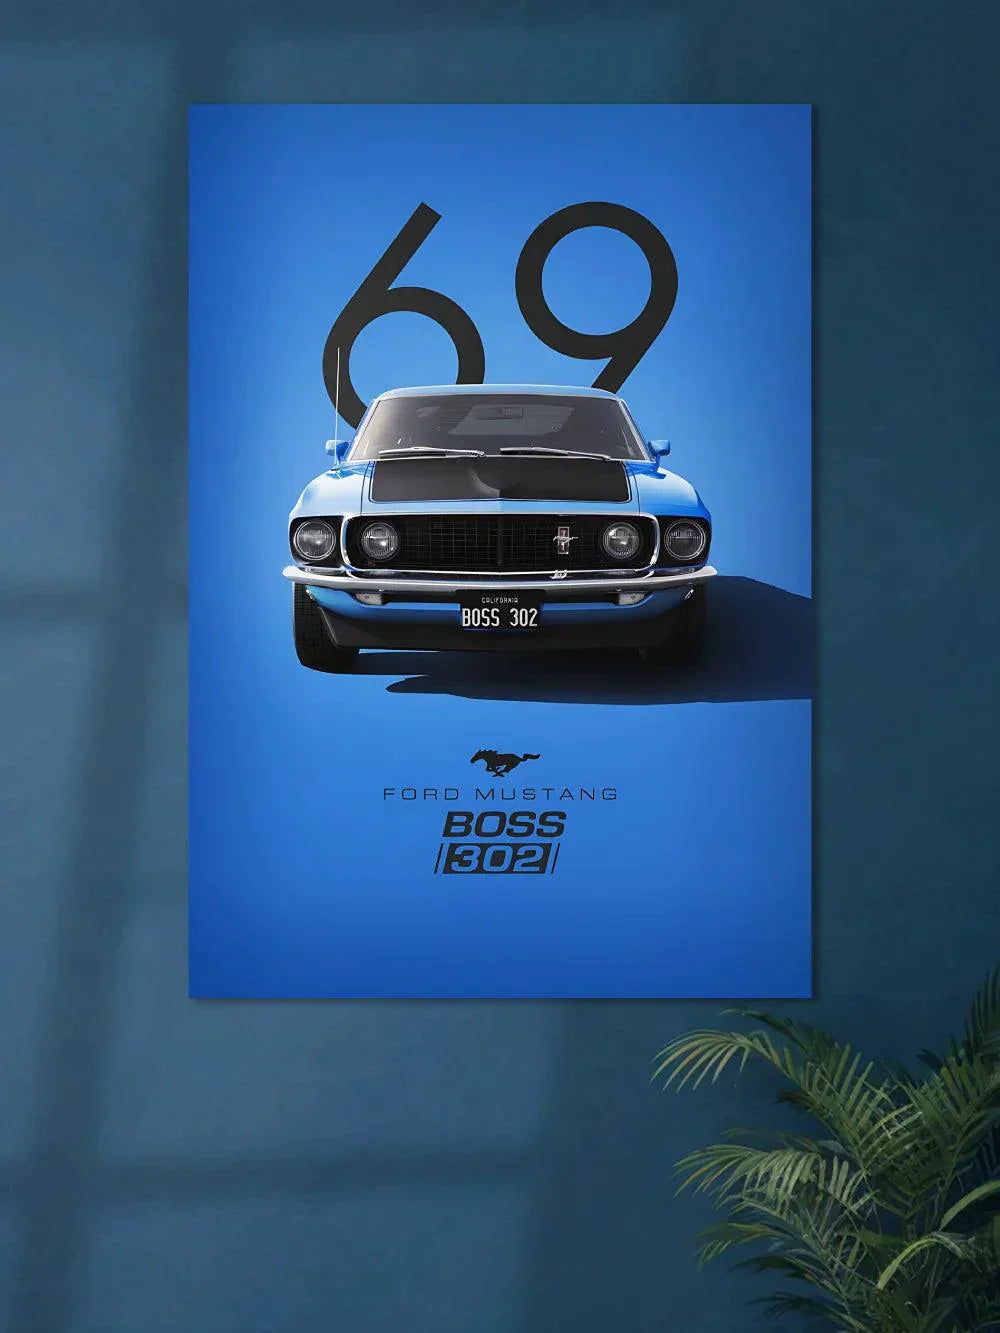 Ford Mustang 69 Boss - Poster Wiz